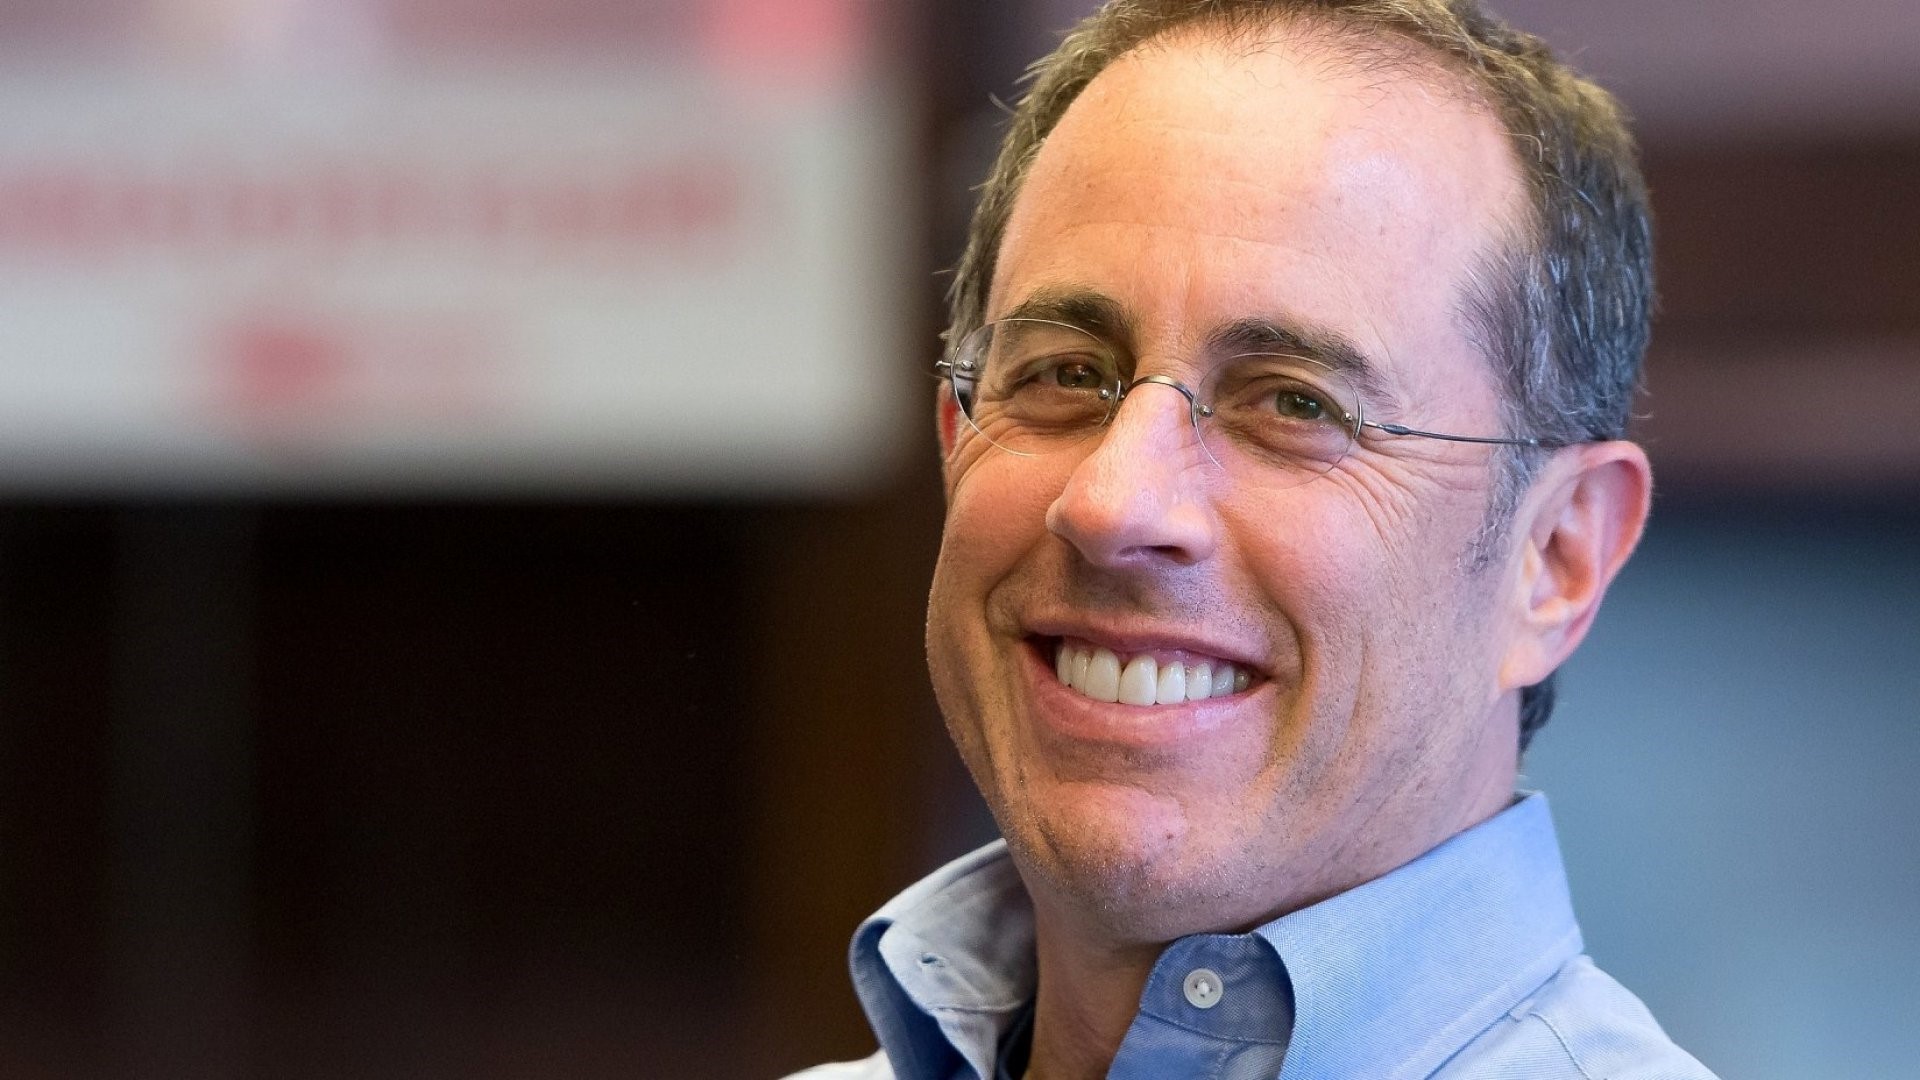 Jerry Seinfeld Stays Cool Amid Anti-Israel Protesters’ Heckling